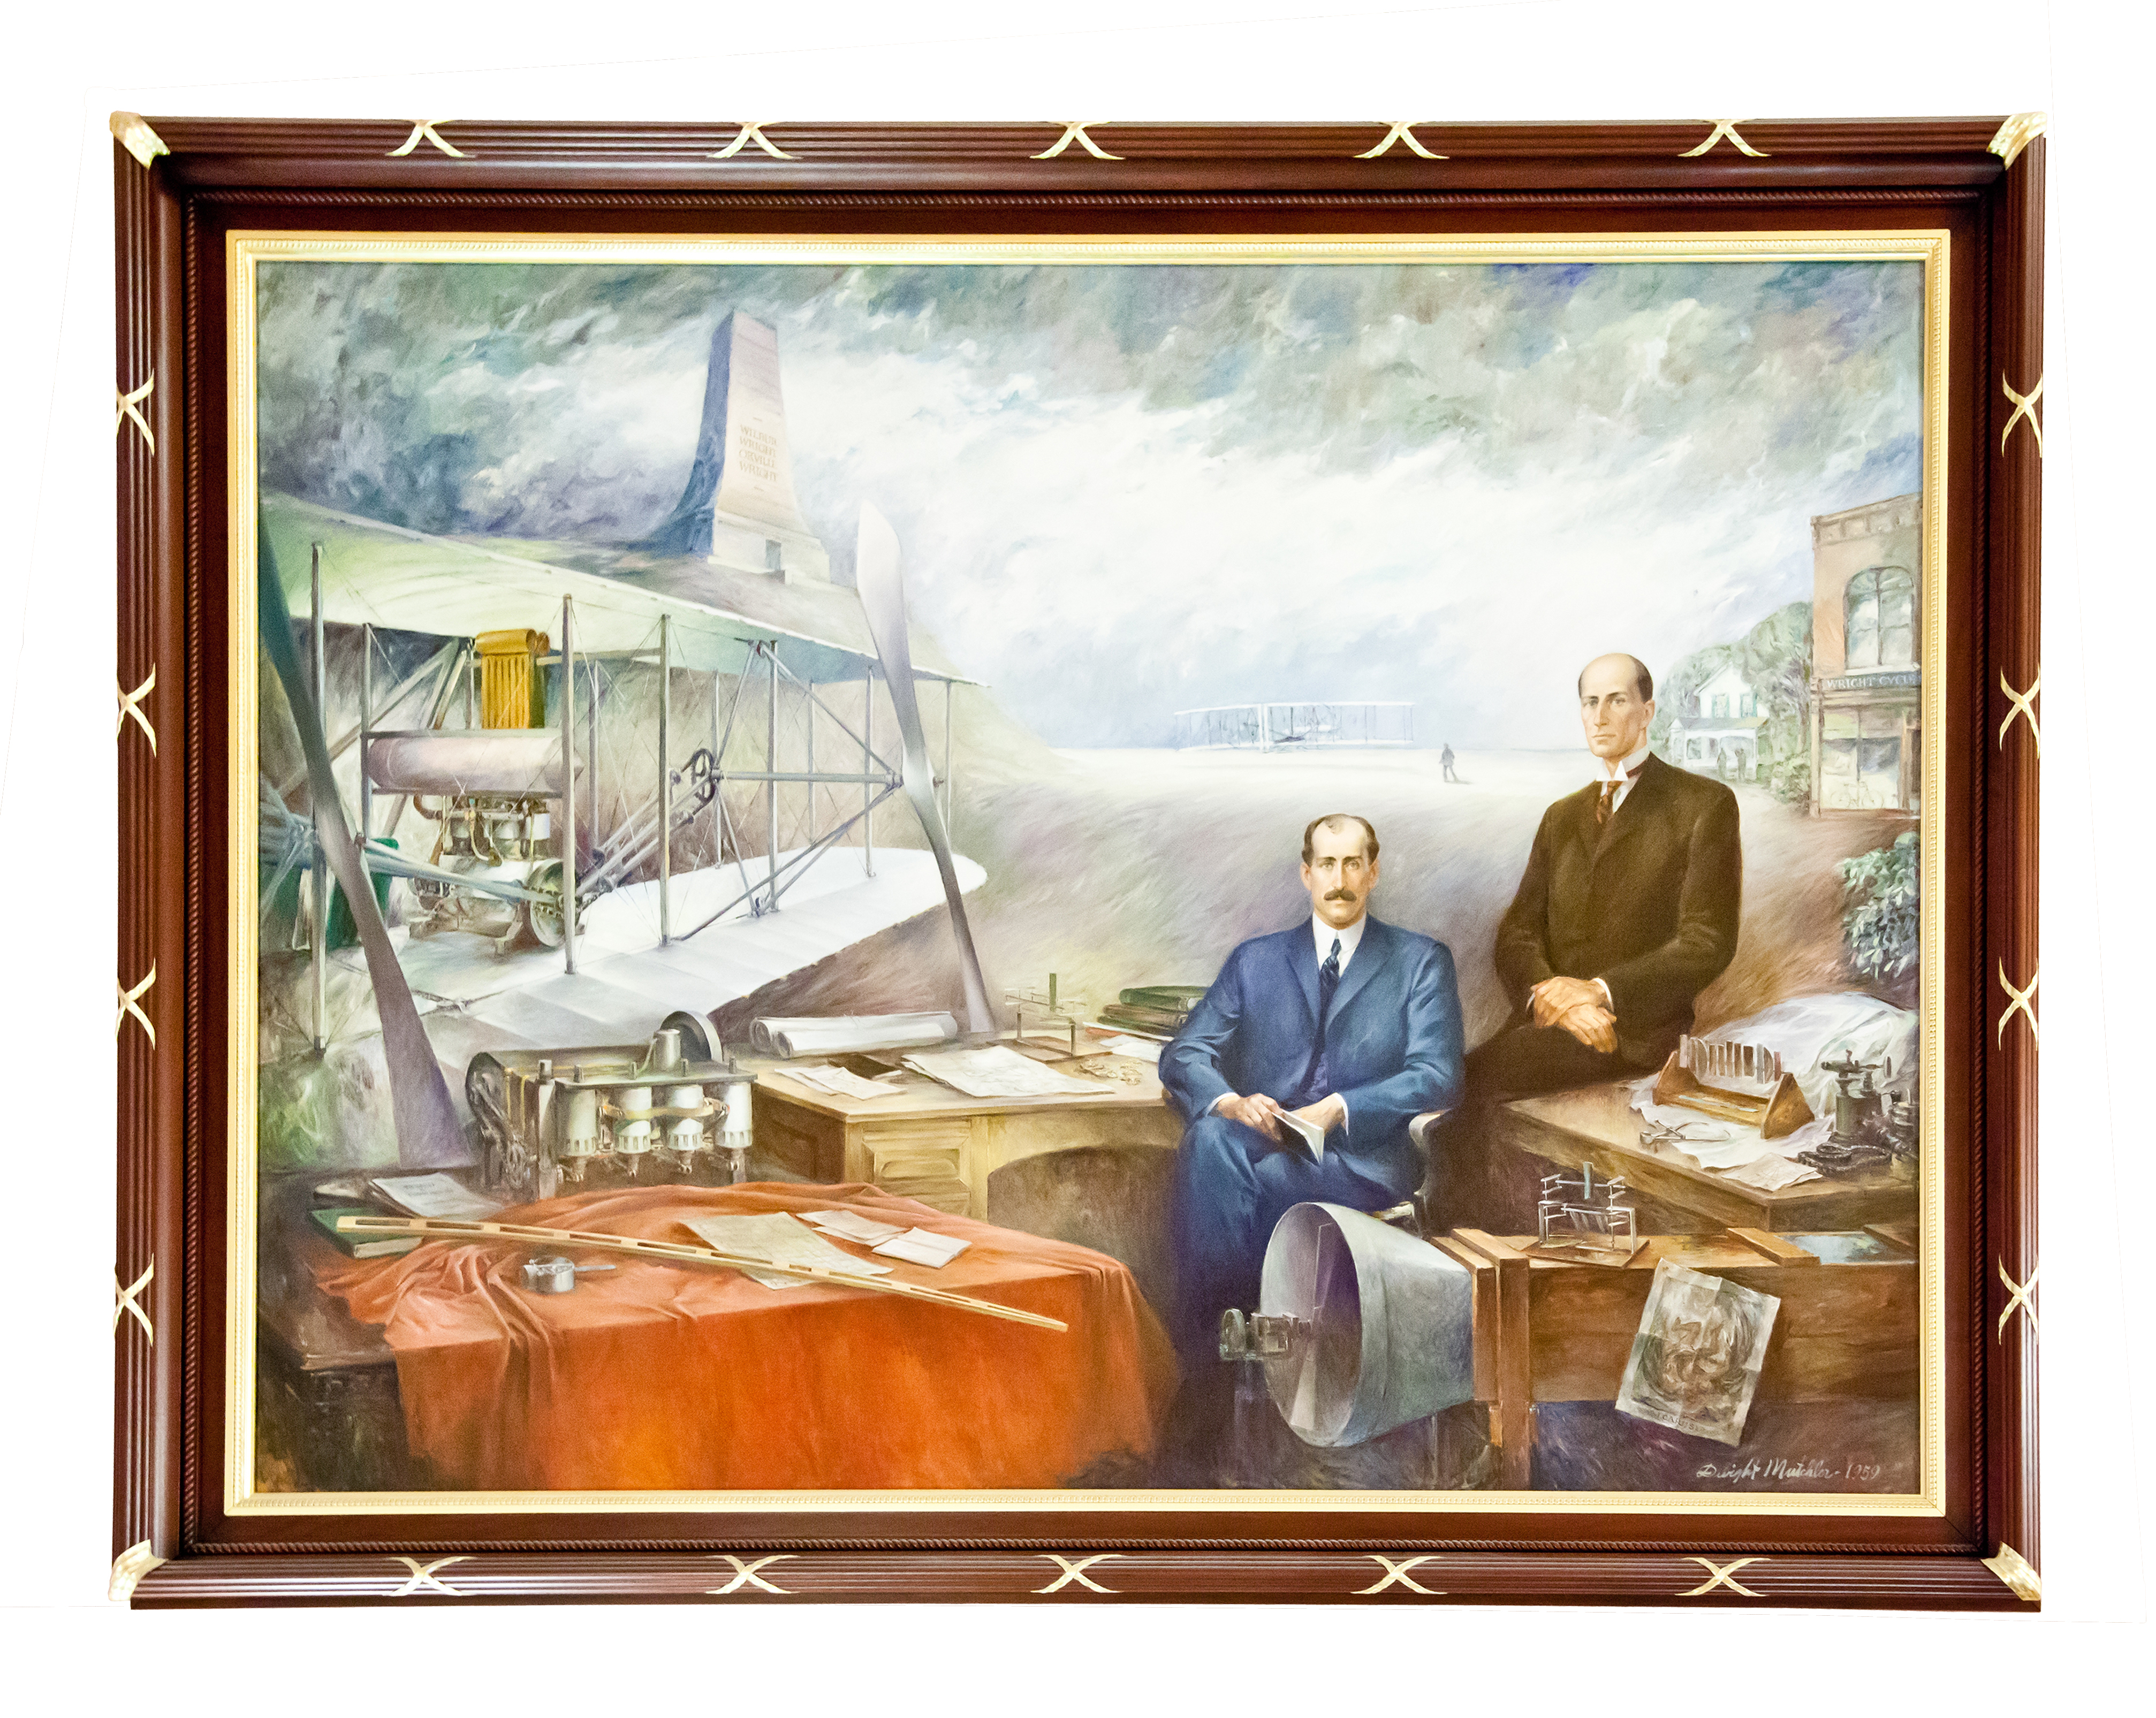 Wilbur and Orville Wright and their Accomplishments